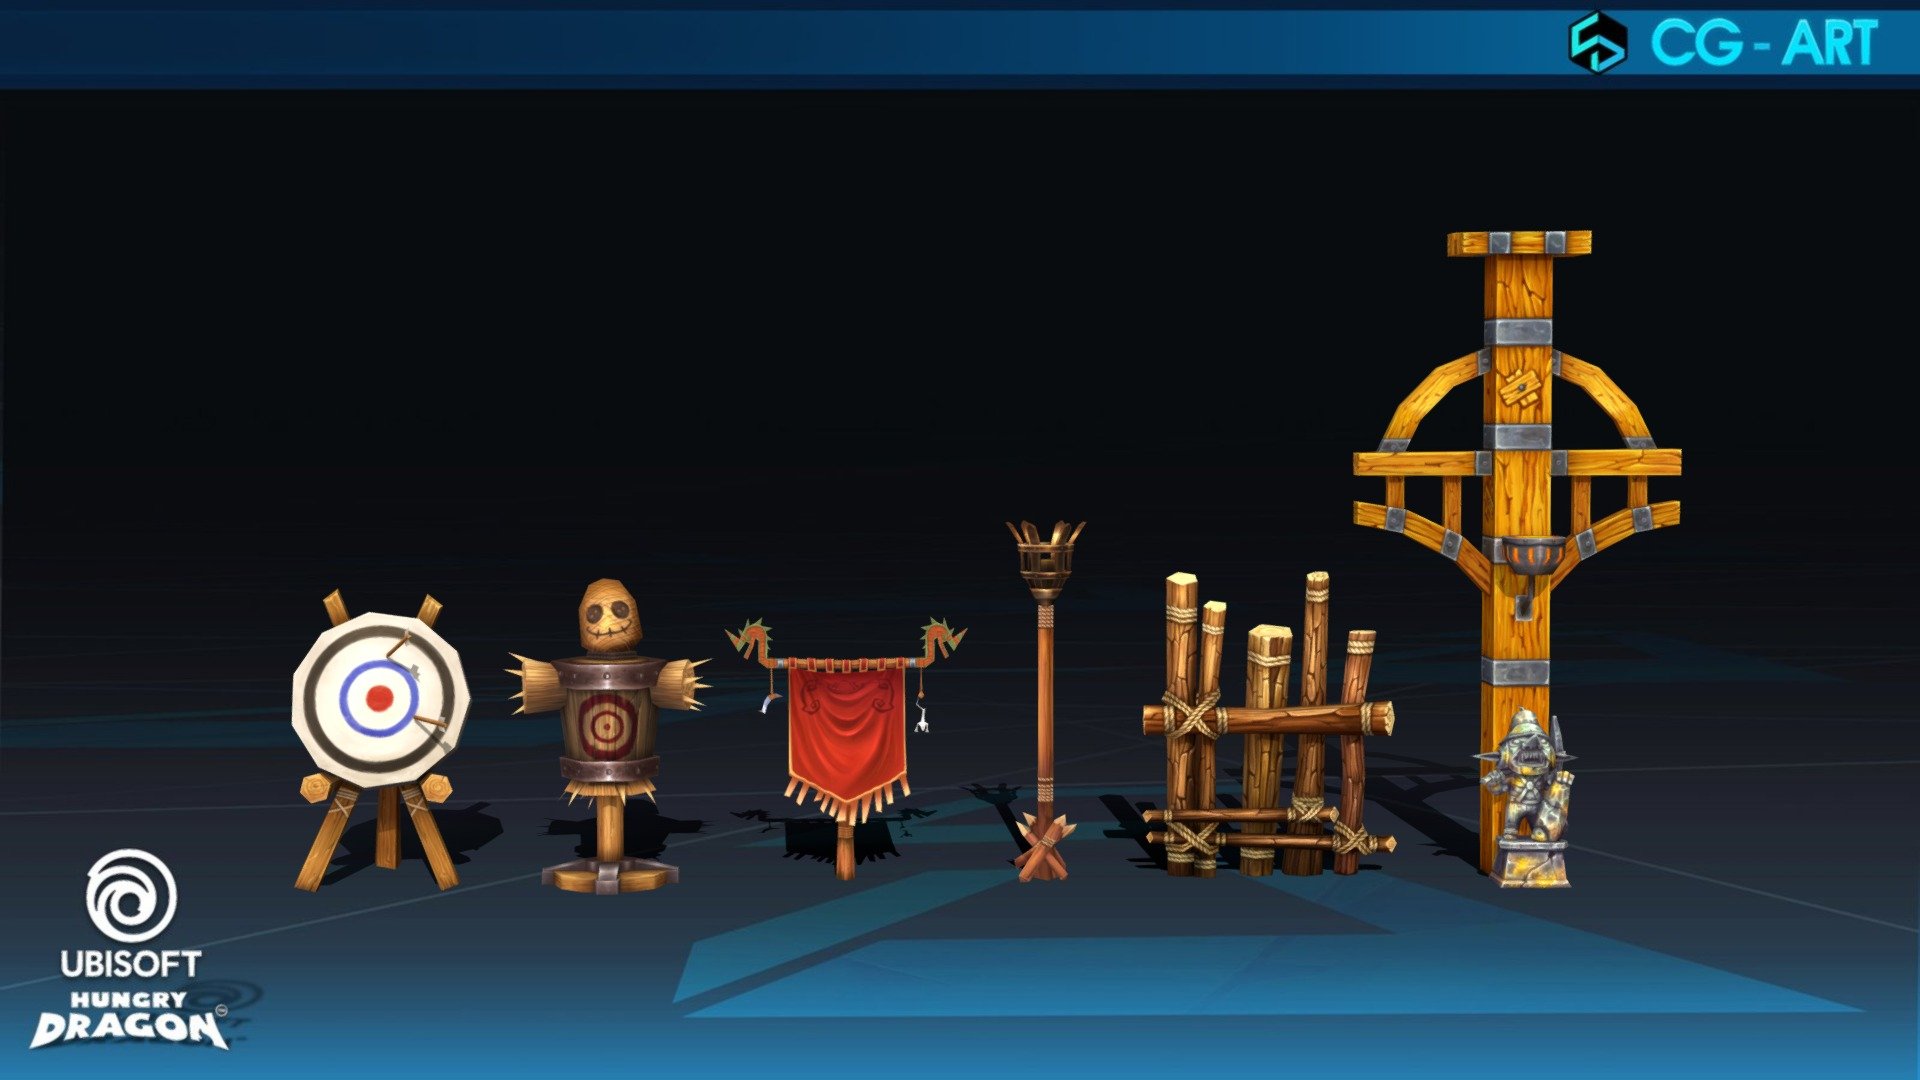 These are artworks that we’ve finished on a project of Ubisoft 3d model